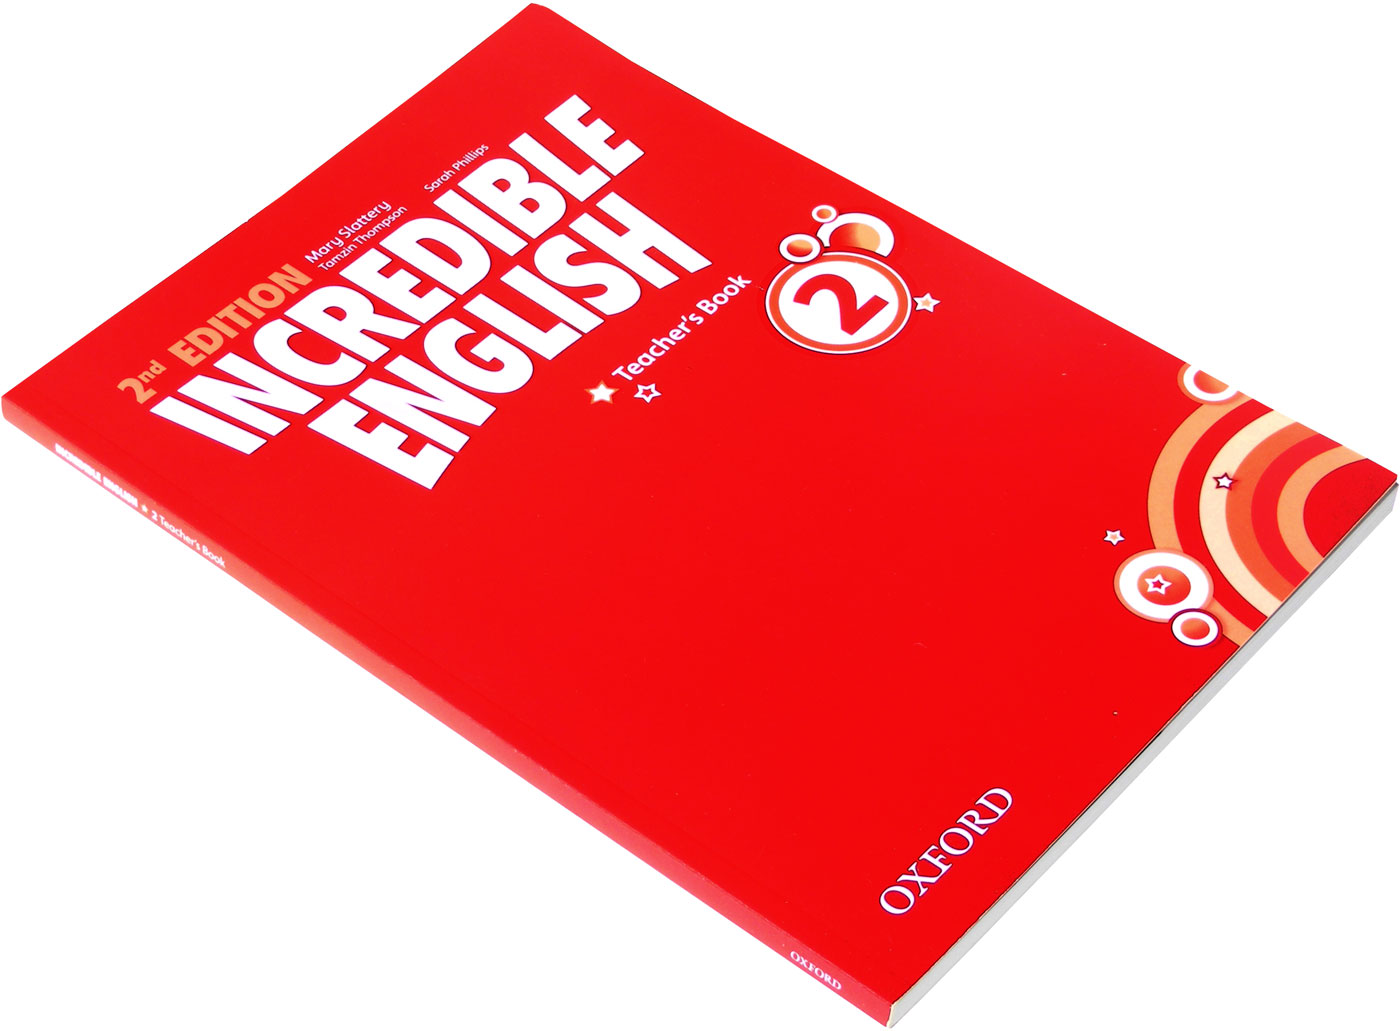 Photograph of the ELT teachers workbook, red front cover at a 45 degree angle